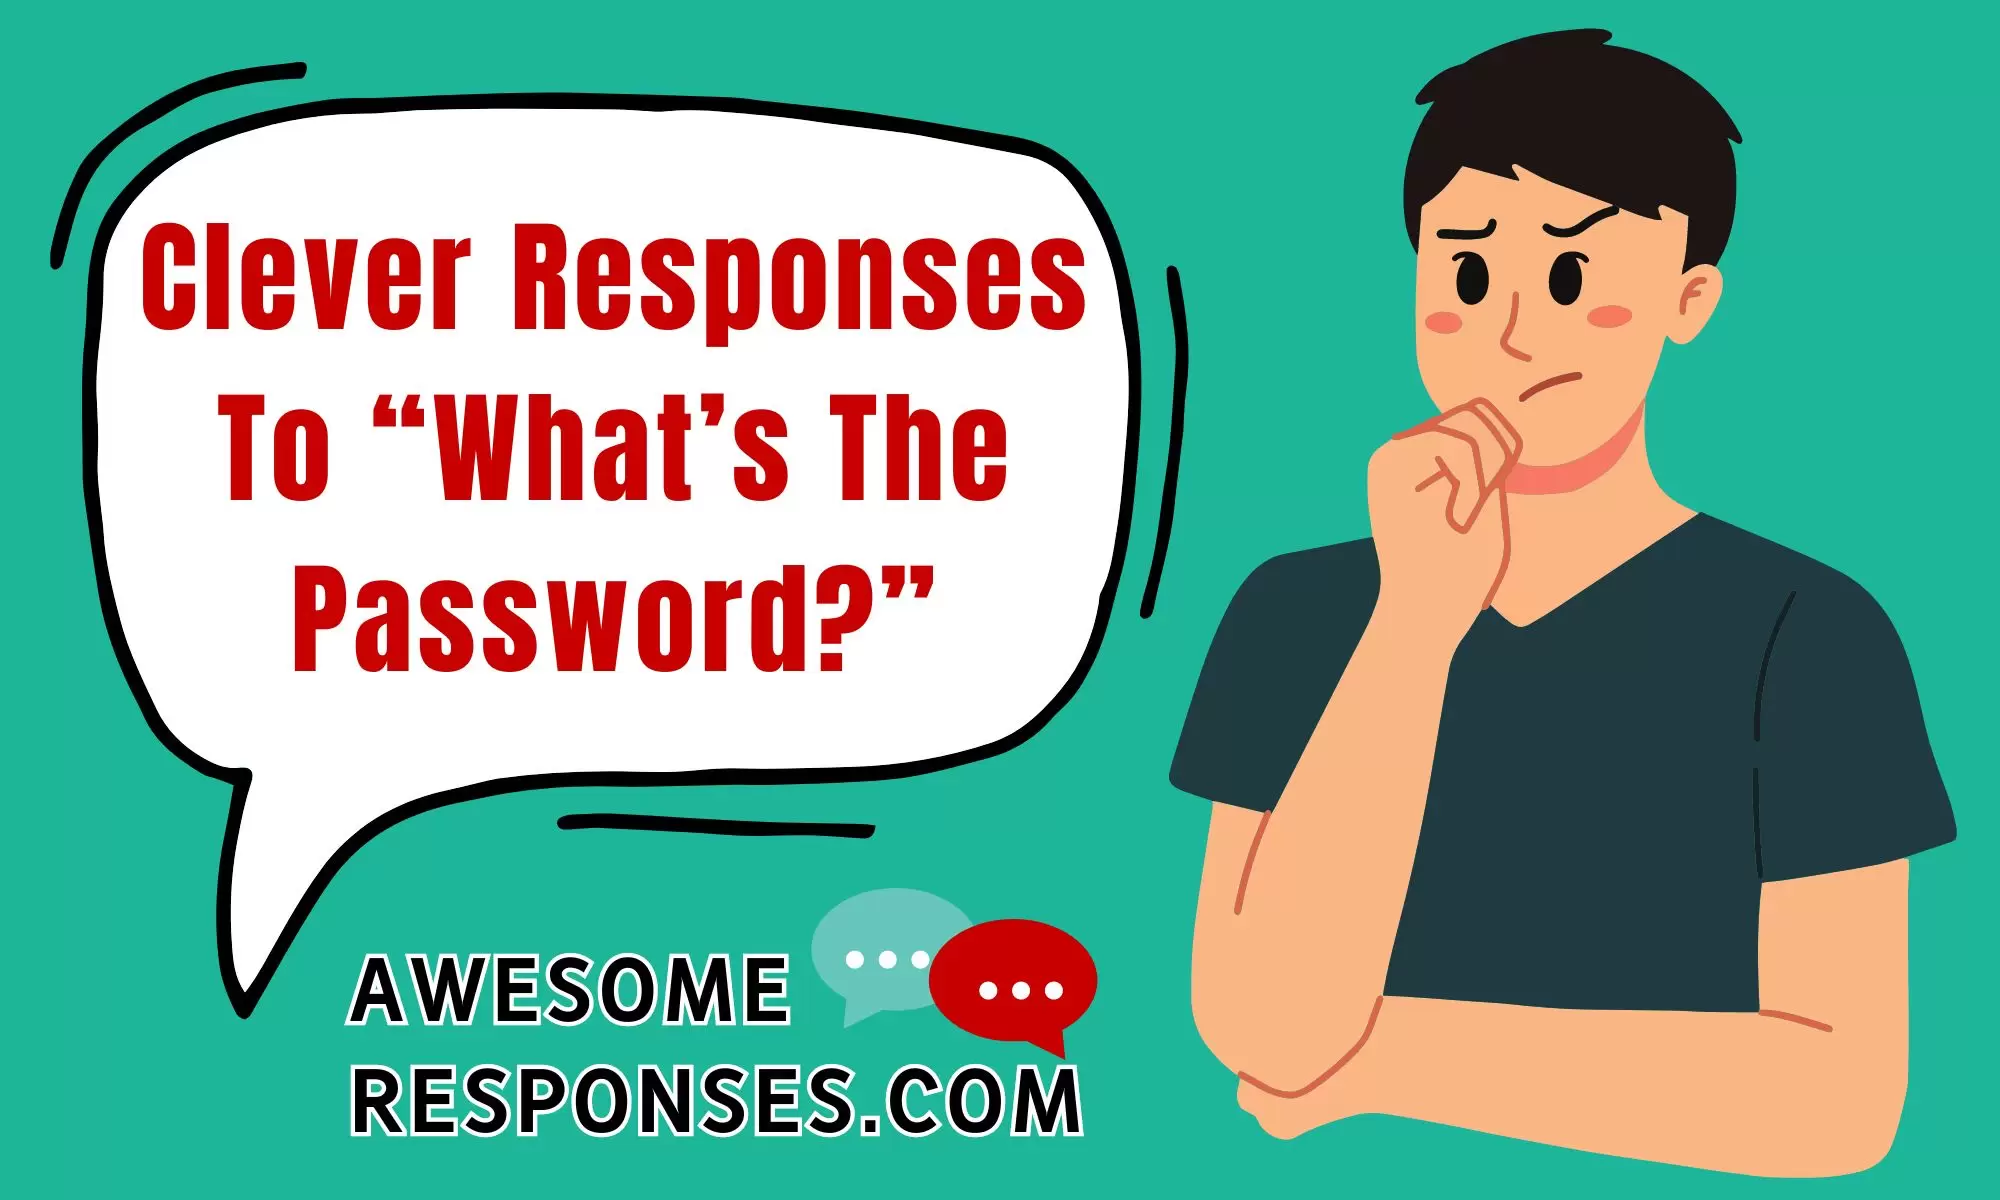 Clever Responses To “What’s The Password?”